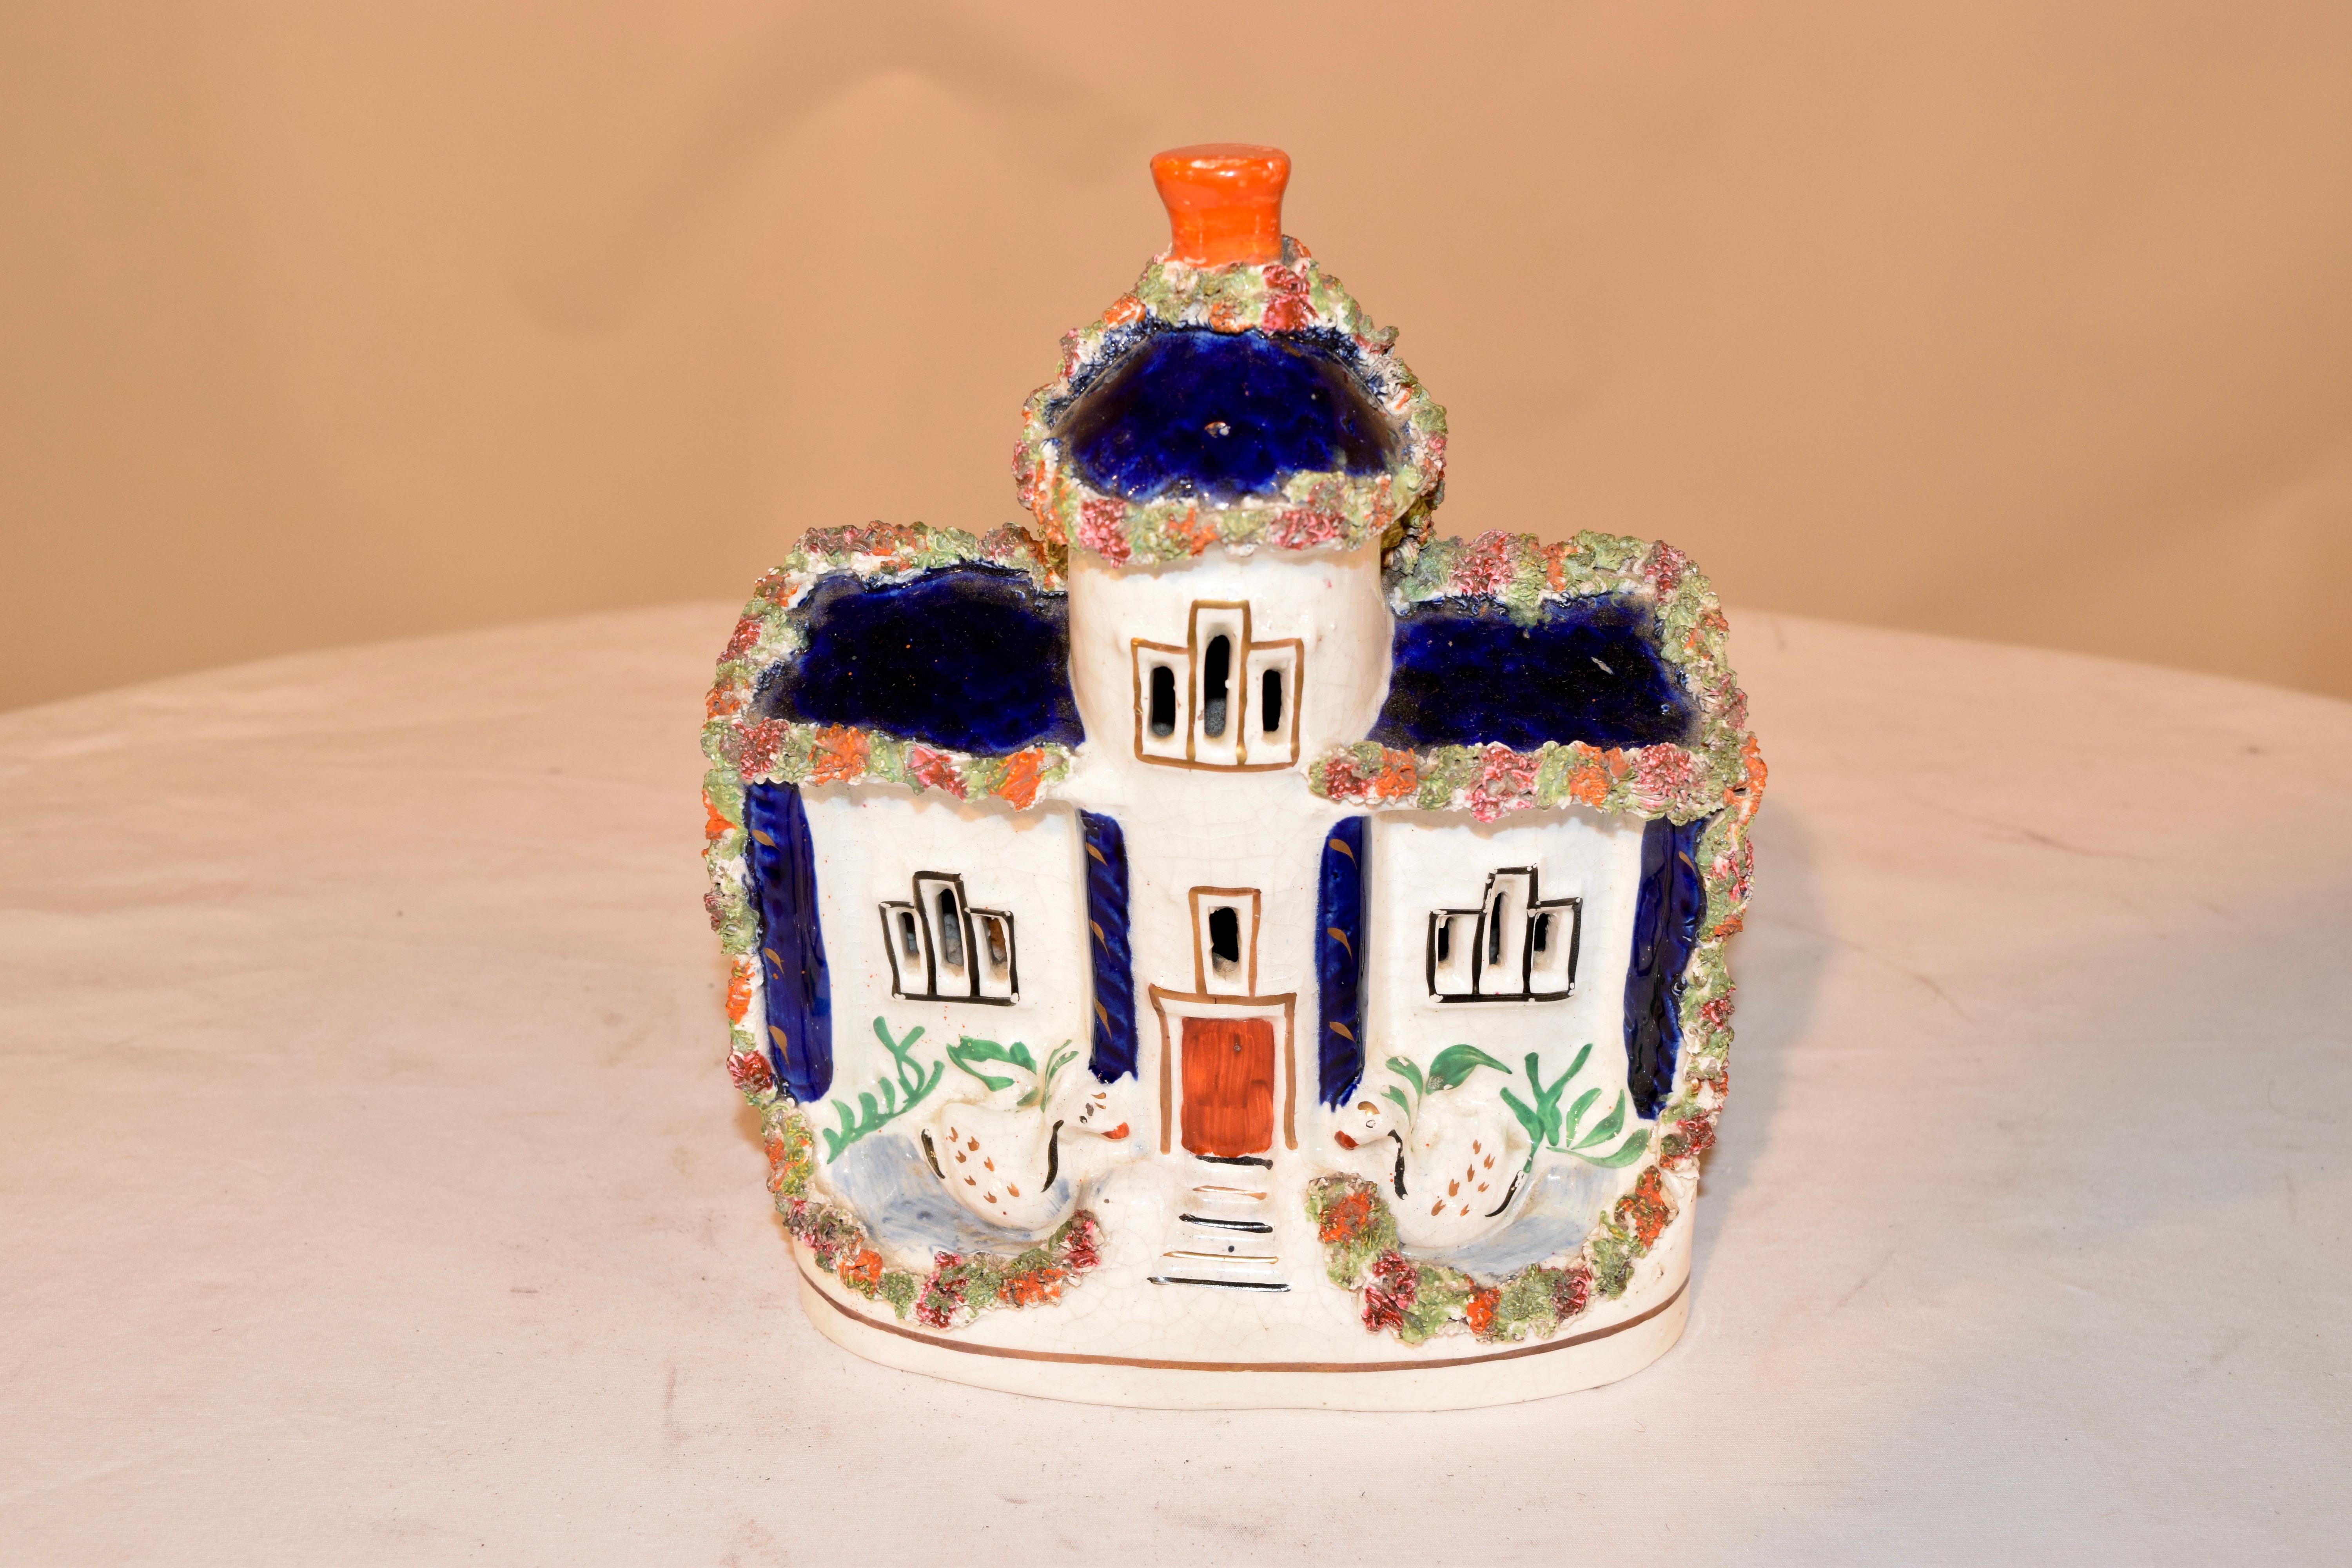 19th century Staffordshire cottage from England with swans flanking the front door and a cobalt room with flocking detail. Lovely form.